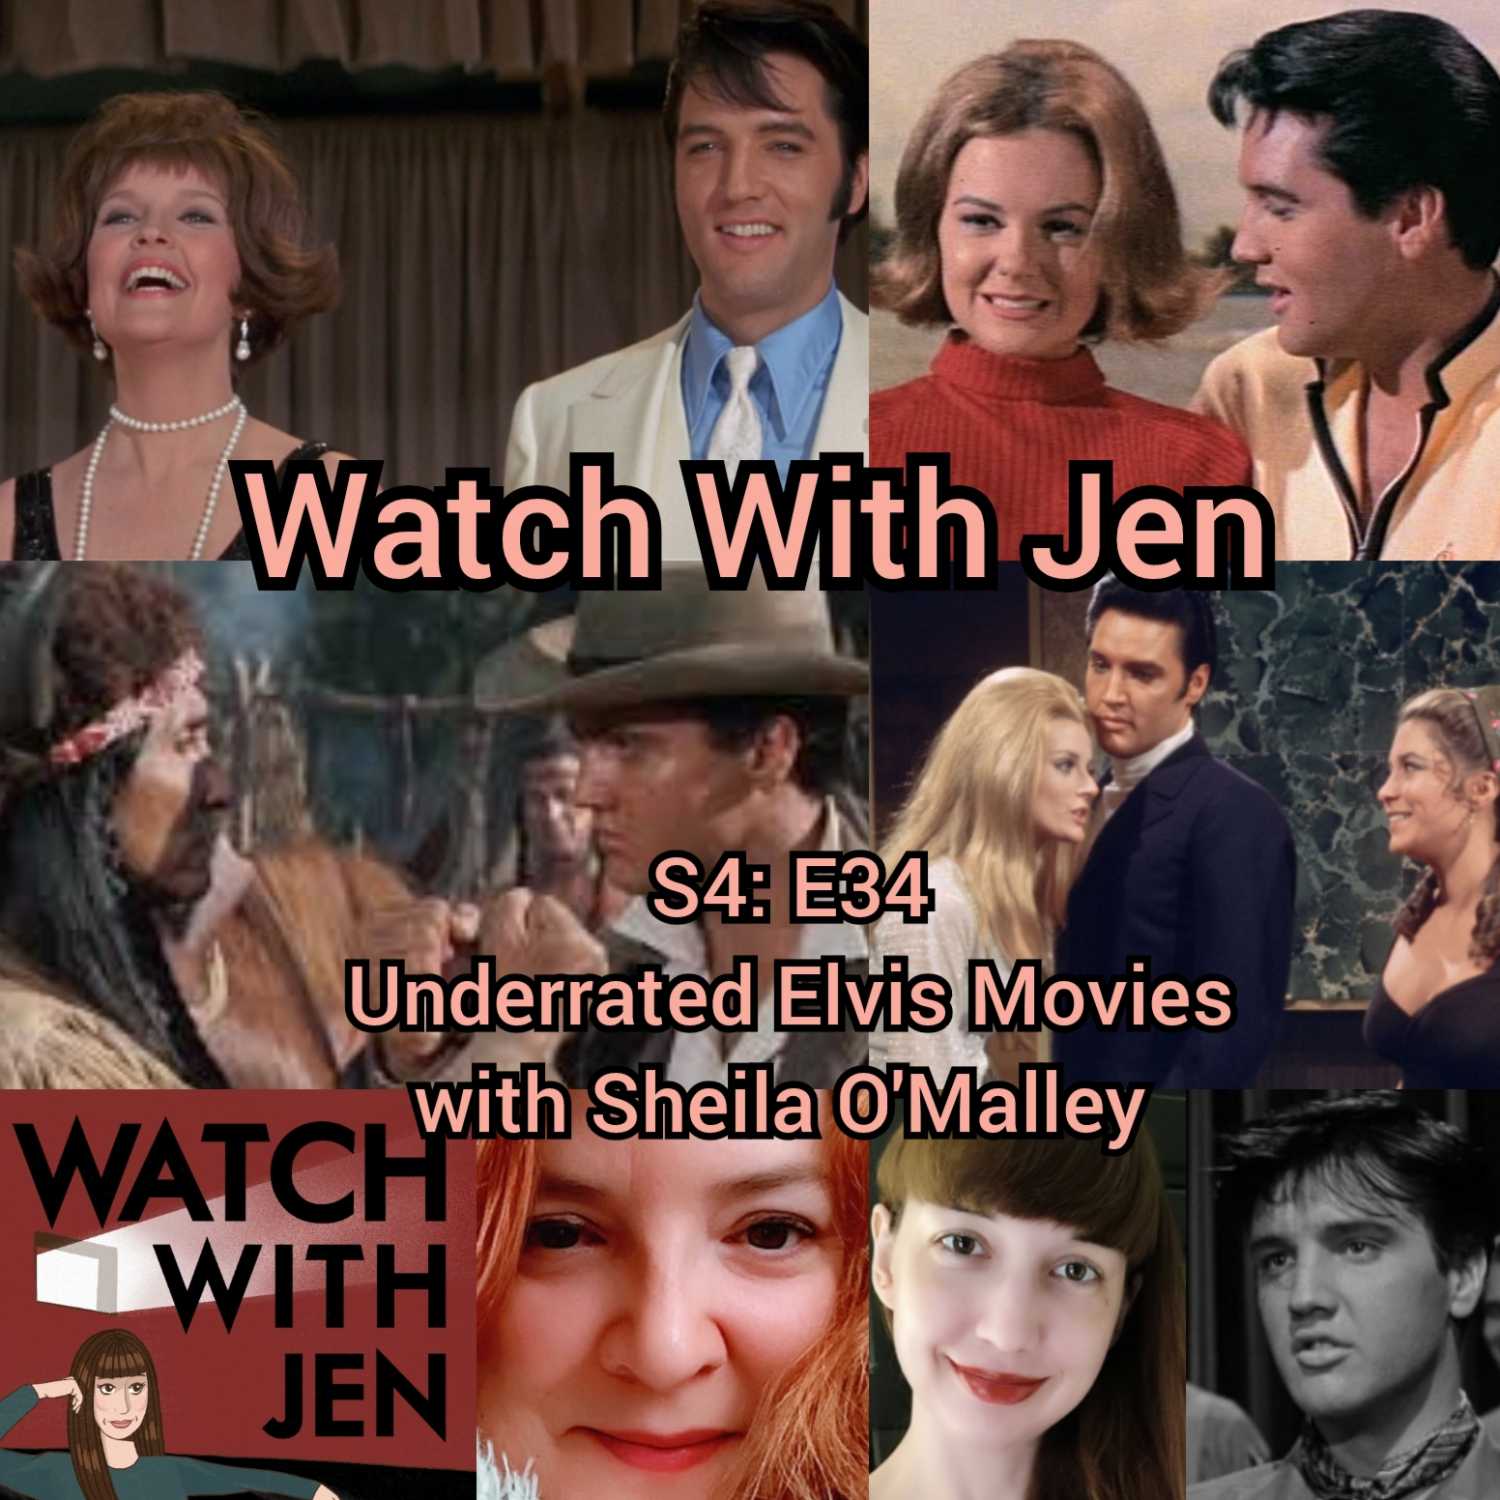 Watch With Jen - S4: E34 - Underrated Elvis Movies with Sheila O'Malley